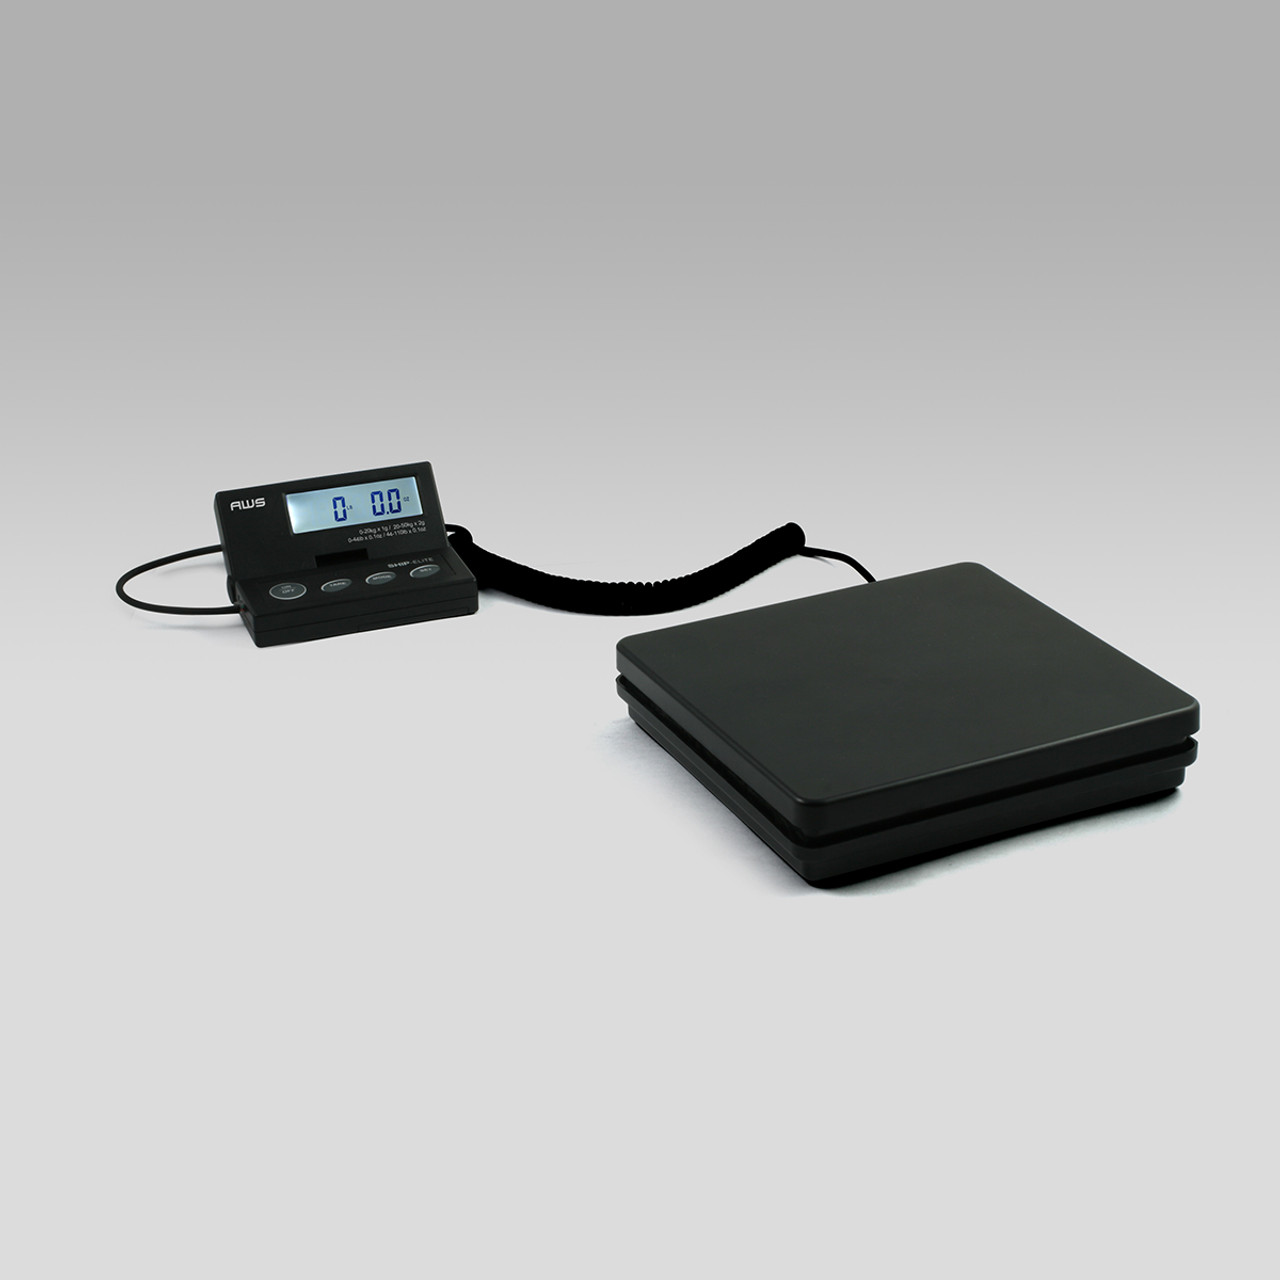 Smart Weigh ACE110 Digital Shipping Postal Scale - Black for sale online